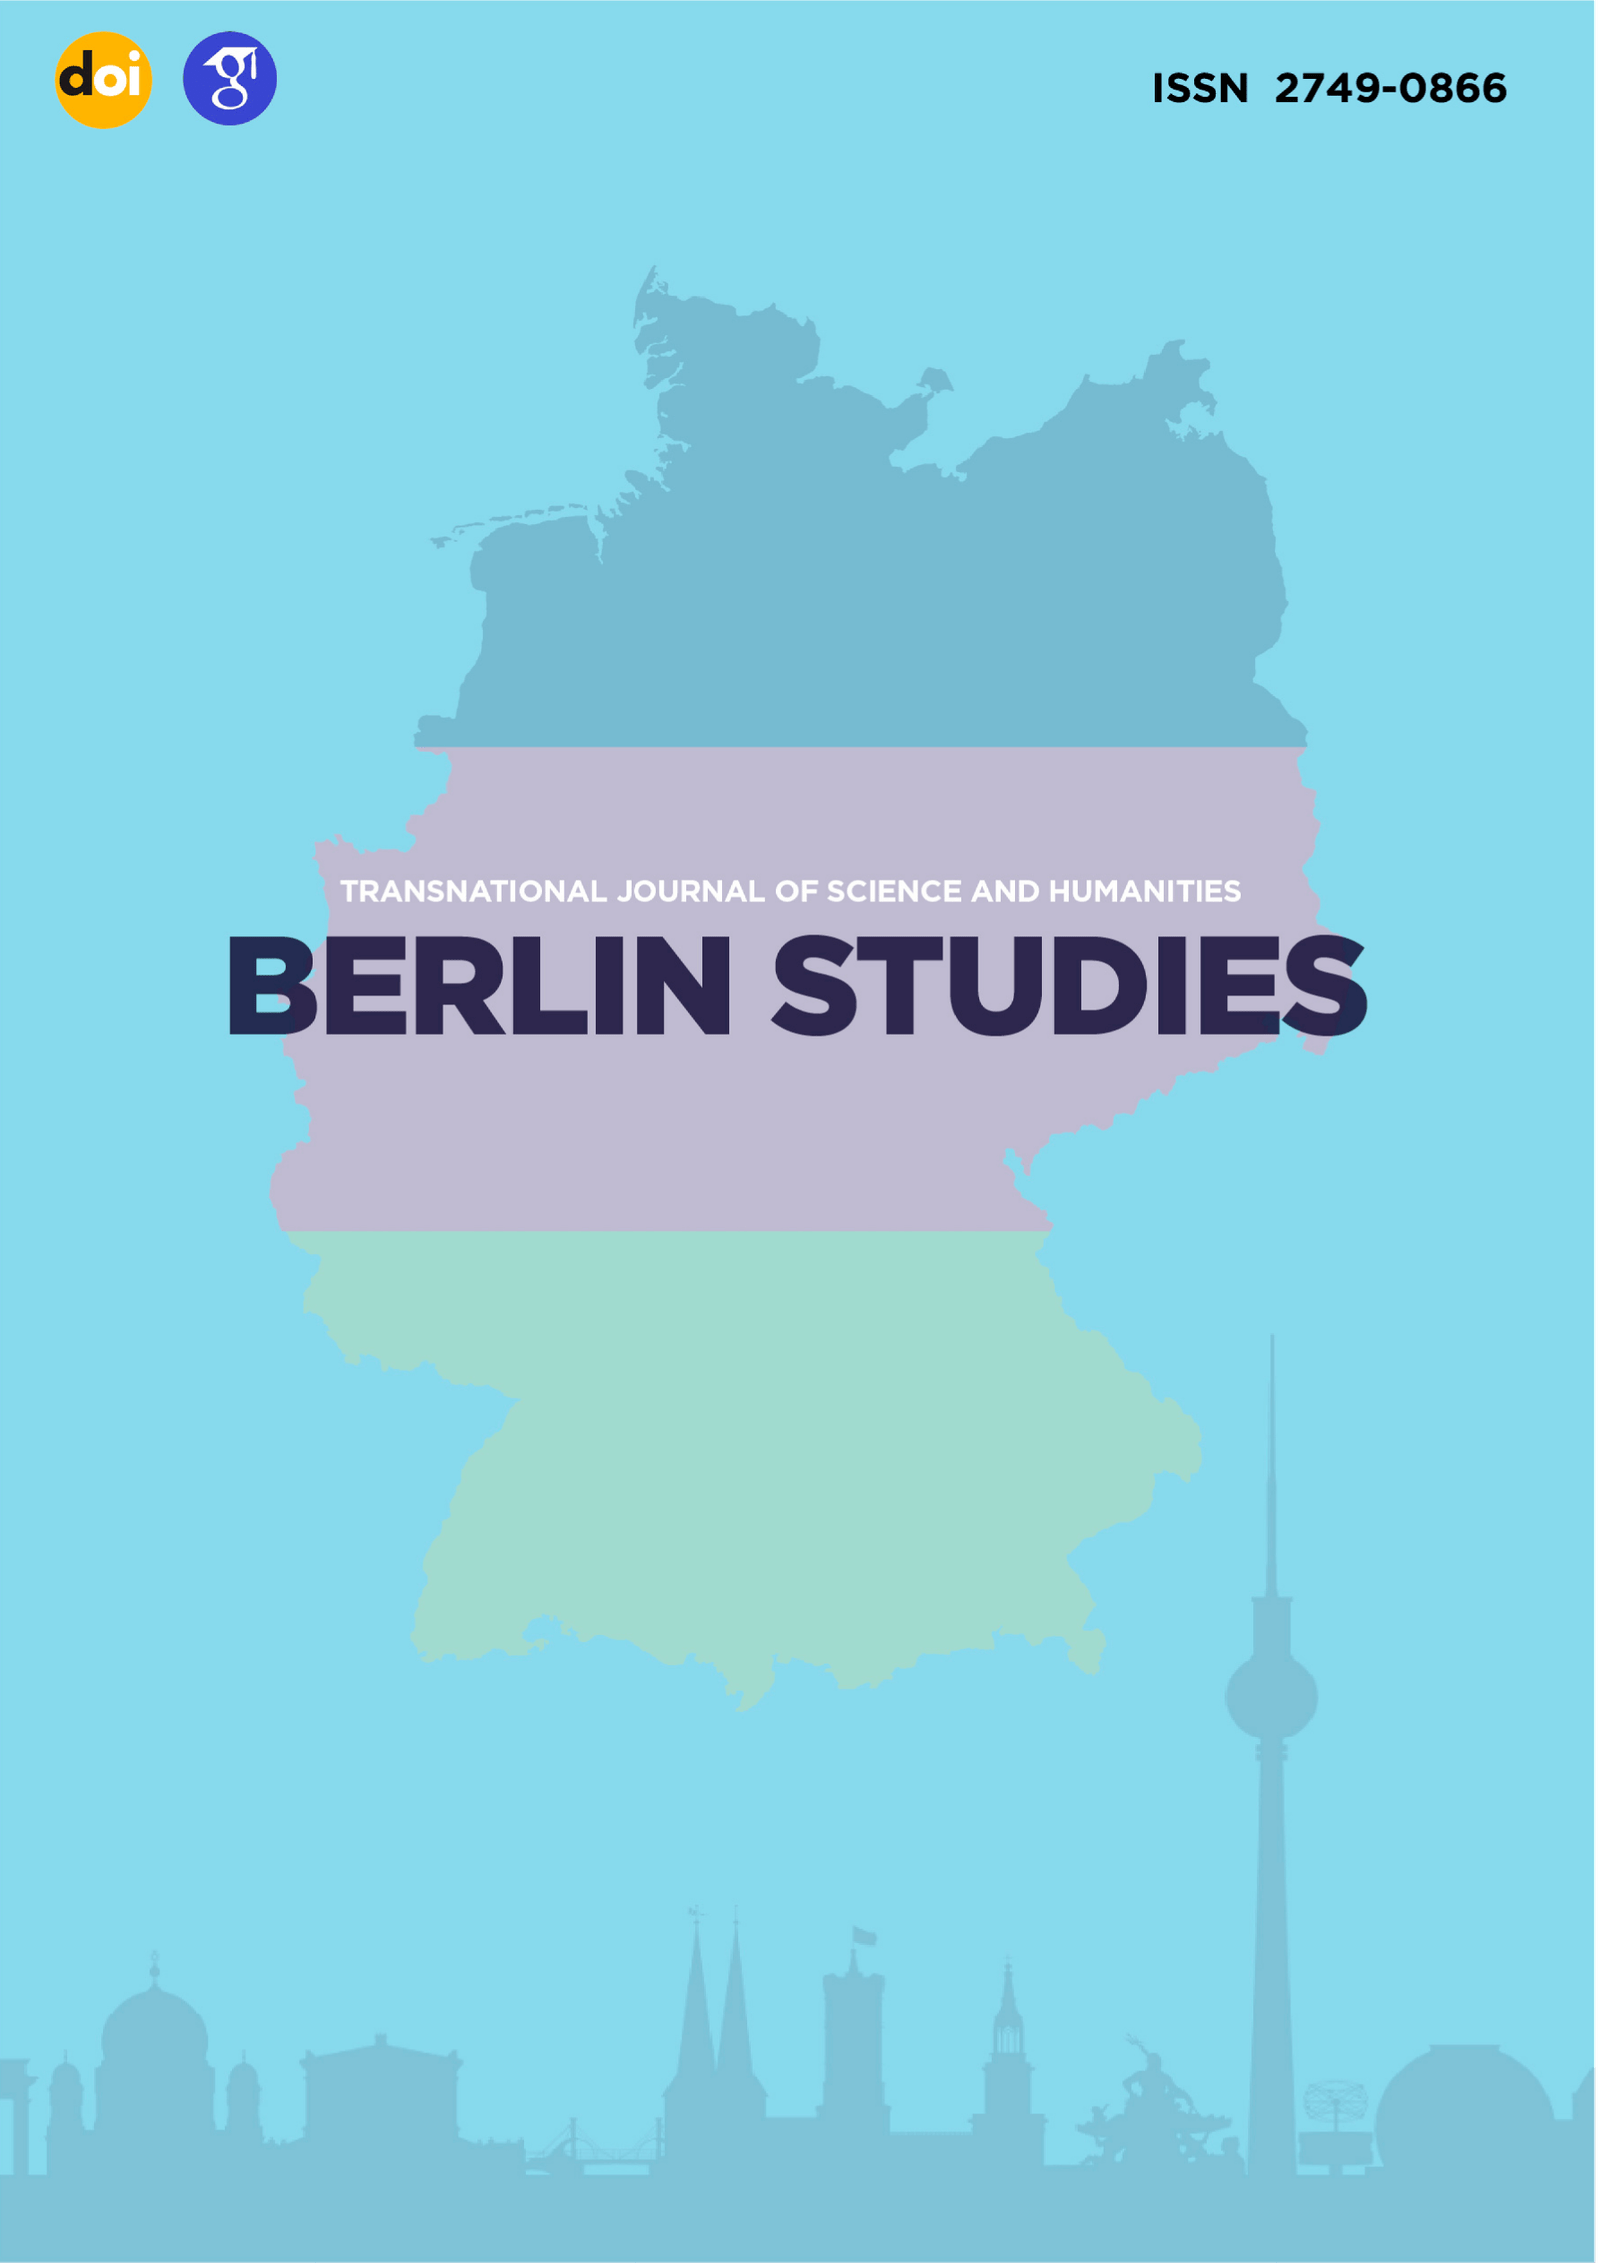 					View Vol. 2 No. 1.10 Sociological sciences (2022): Berlin Studies Transnational Journal of Science and Humanities
				